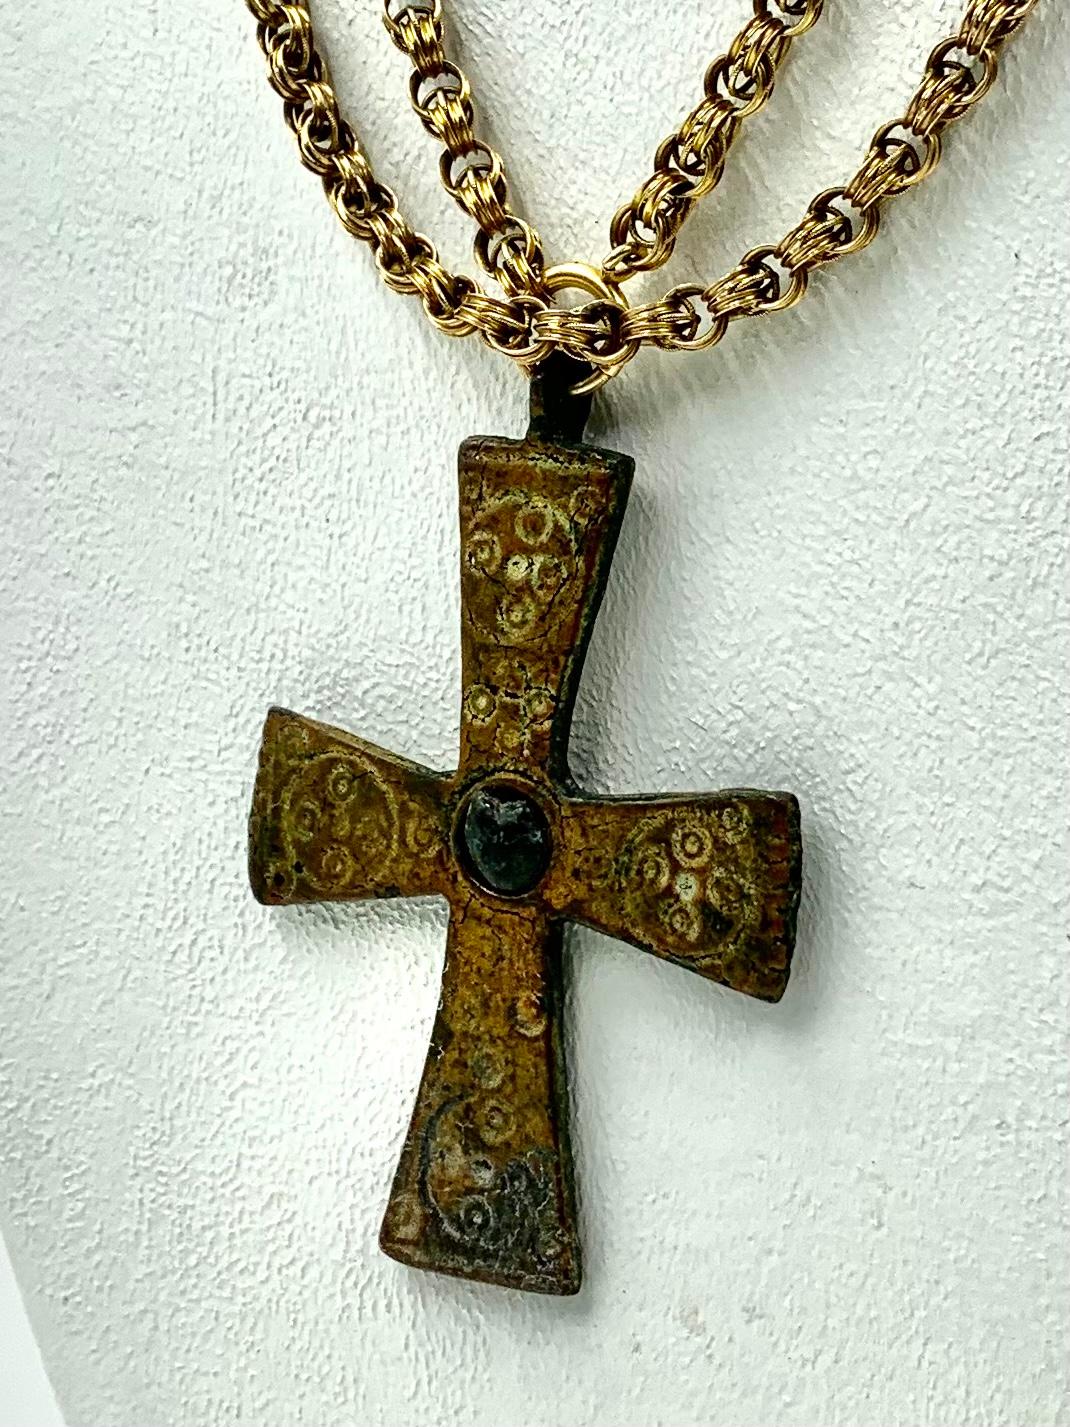 Large, early Byzantine pectoral cross of exceptionally fine quality and original patina, dating to 5th-7th century A.D. The surface, velvet soft to the touch from centuries of being handled with reverence and love. Each slightly flaring arm engraved